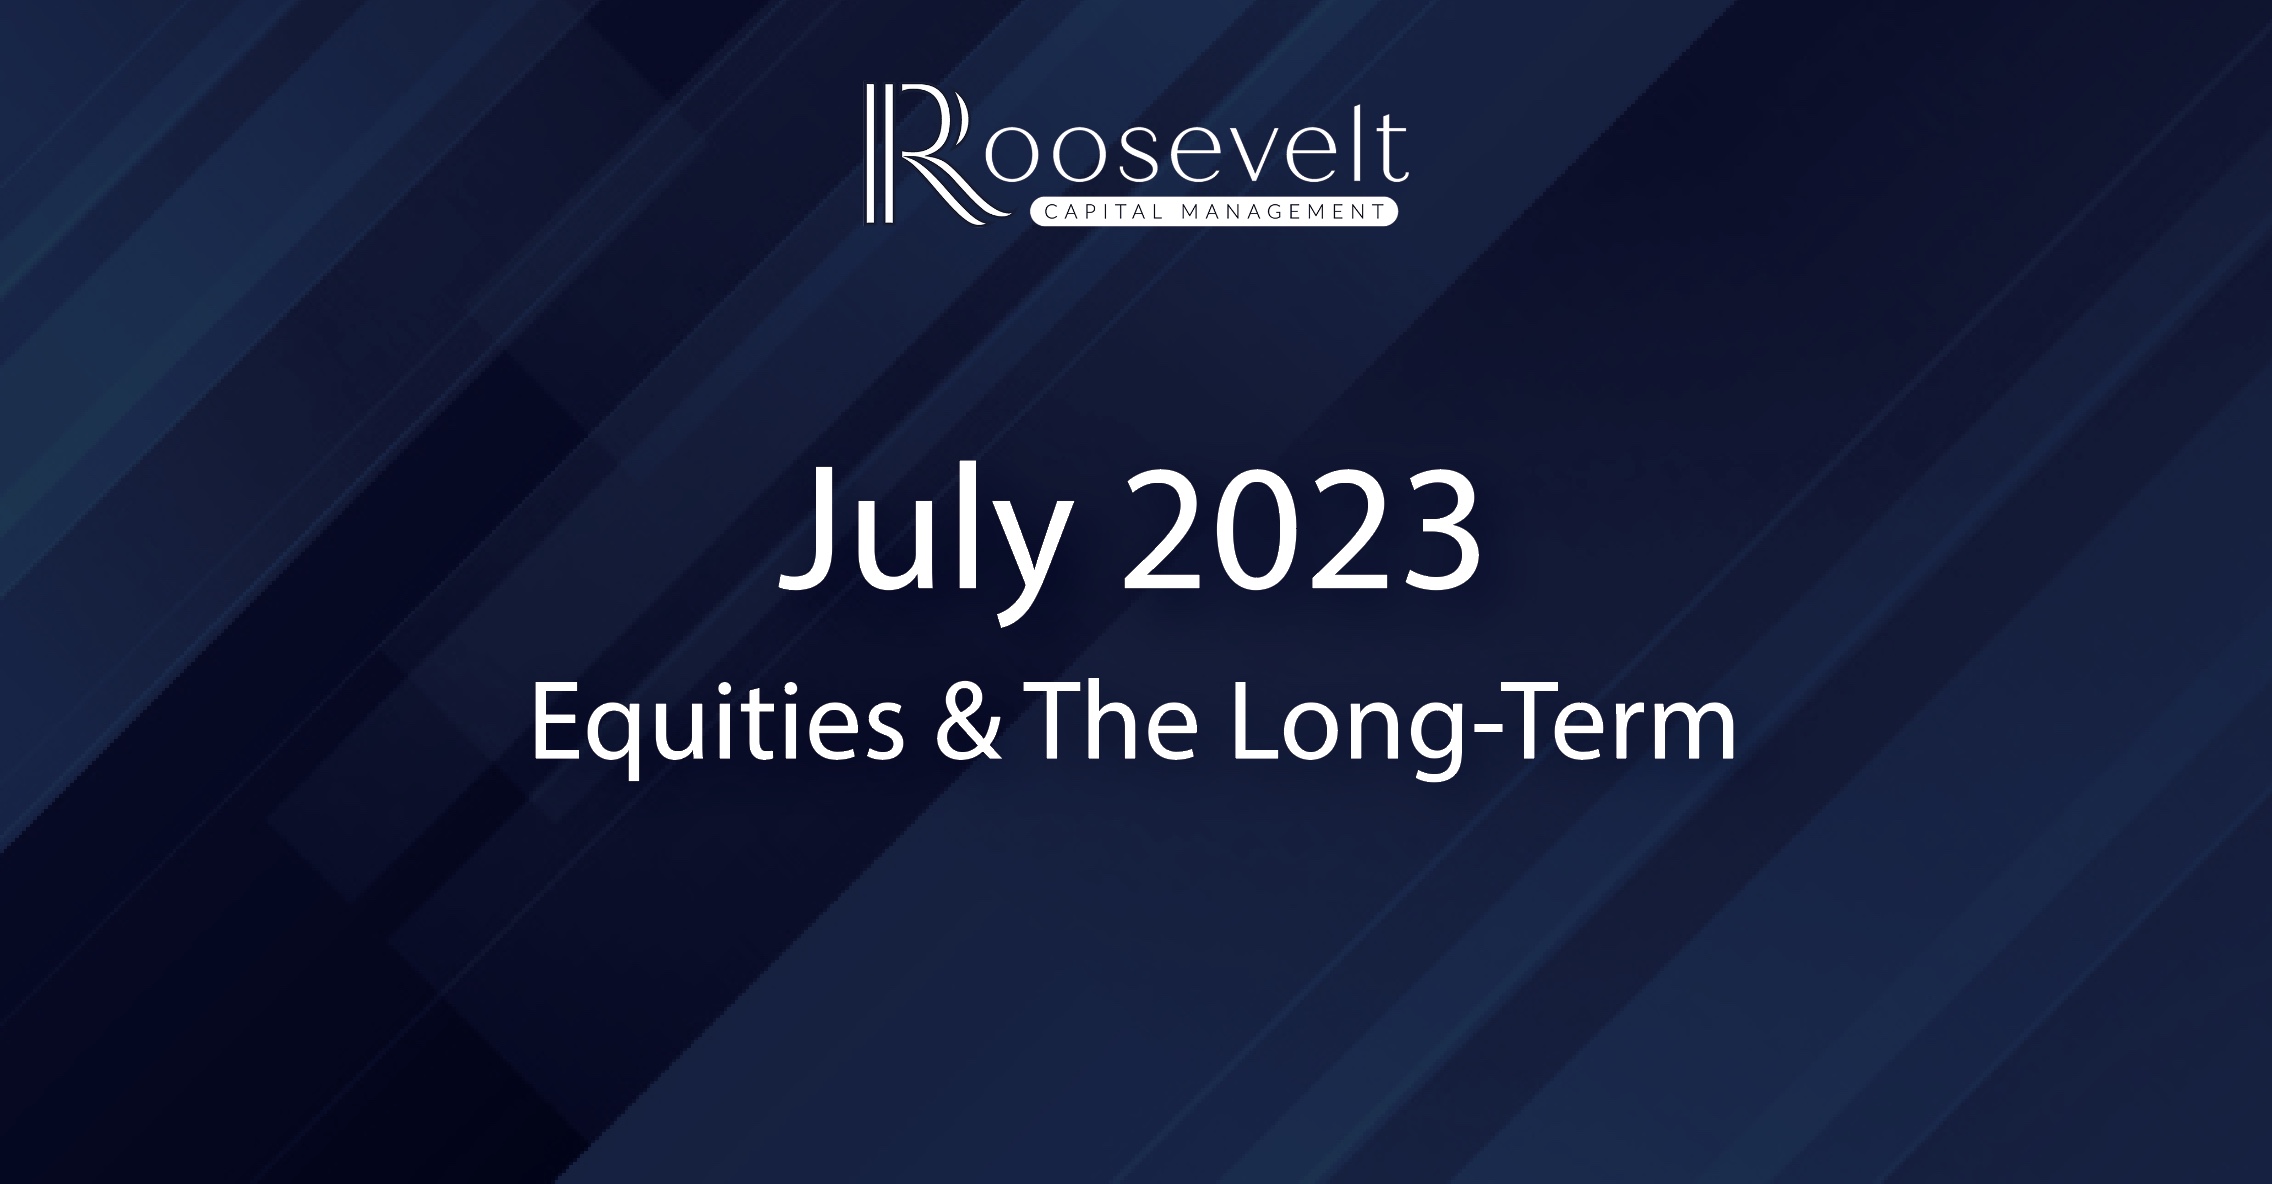 July 2023 - Equities & The Long-Term